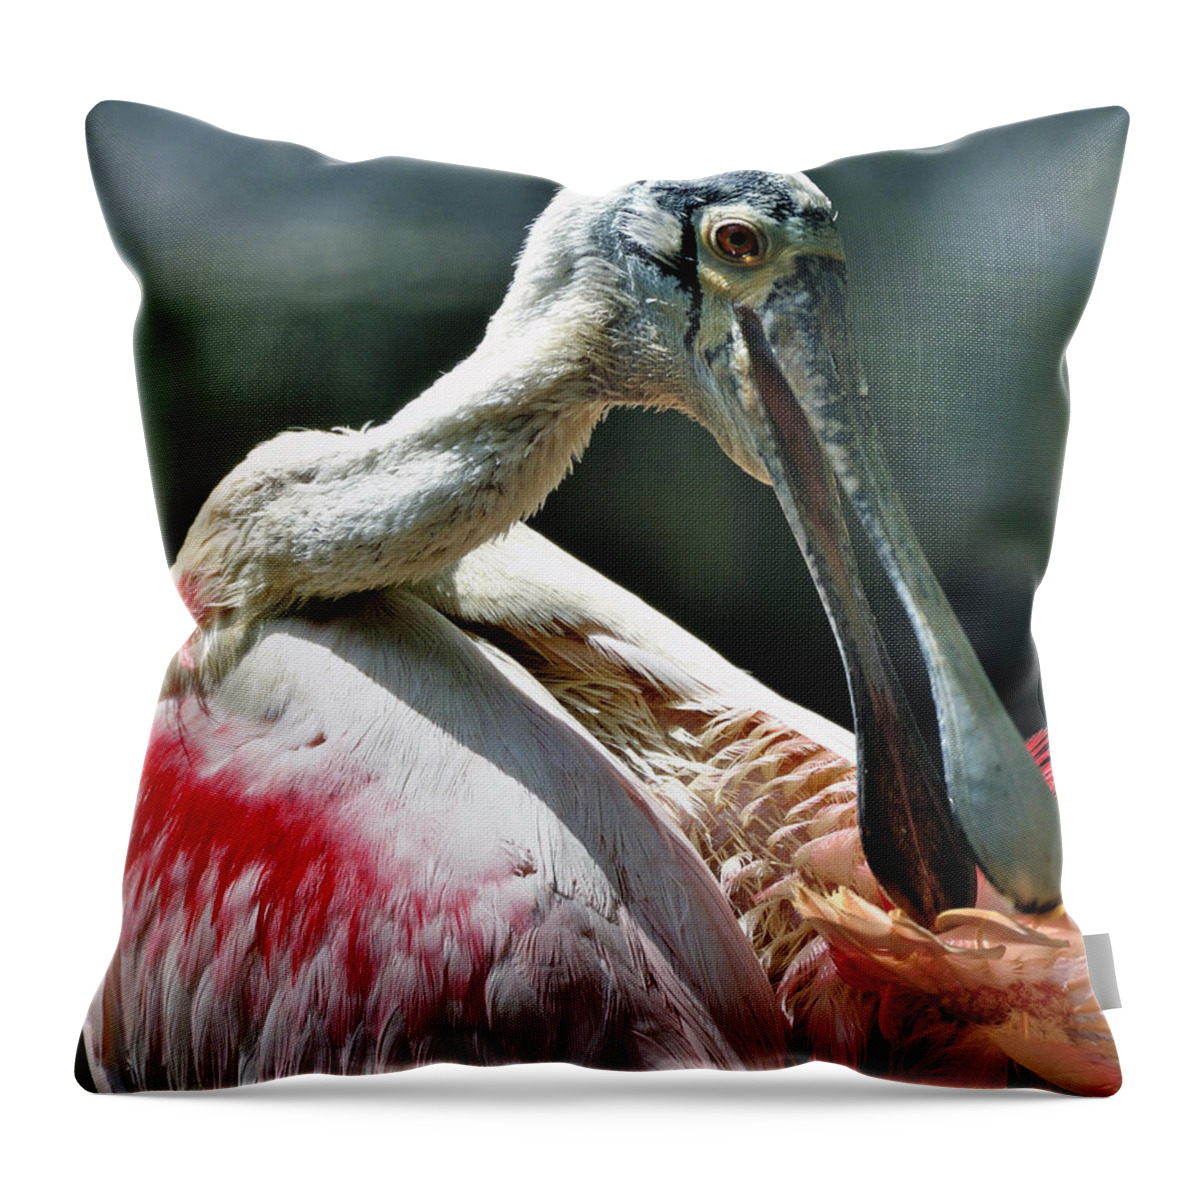 Bird Throw Pillow featuring the photograph Roseate Spoonbill by Donna Proctor